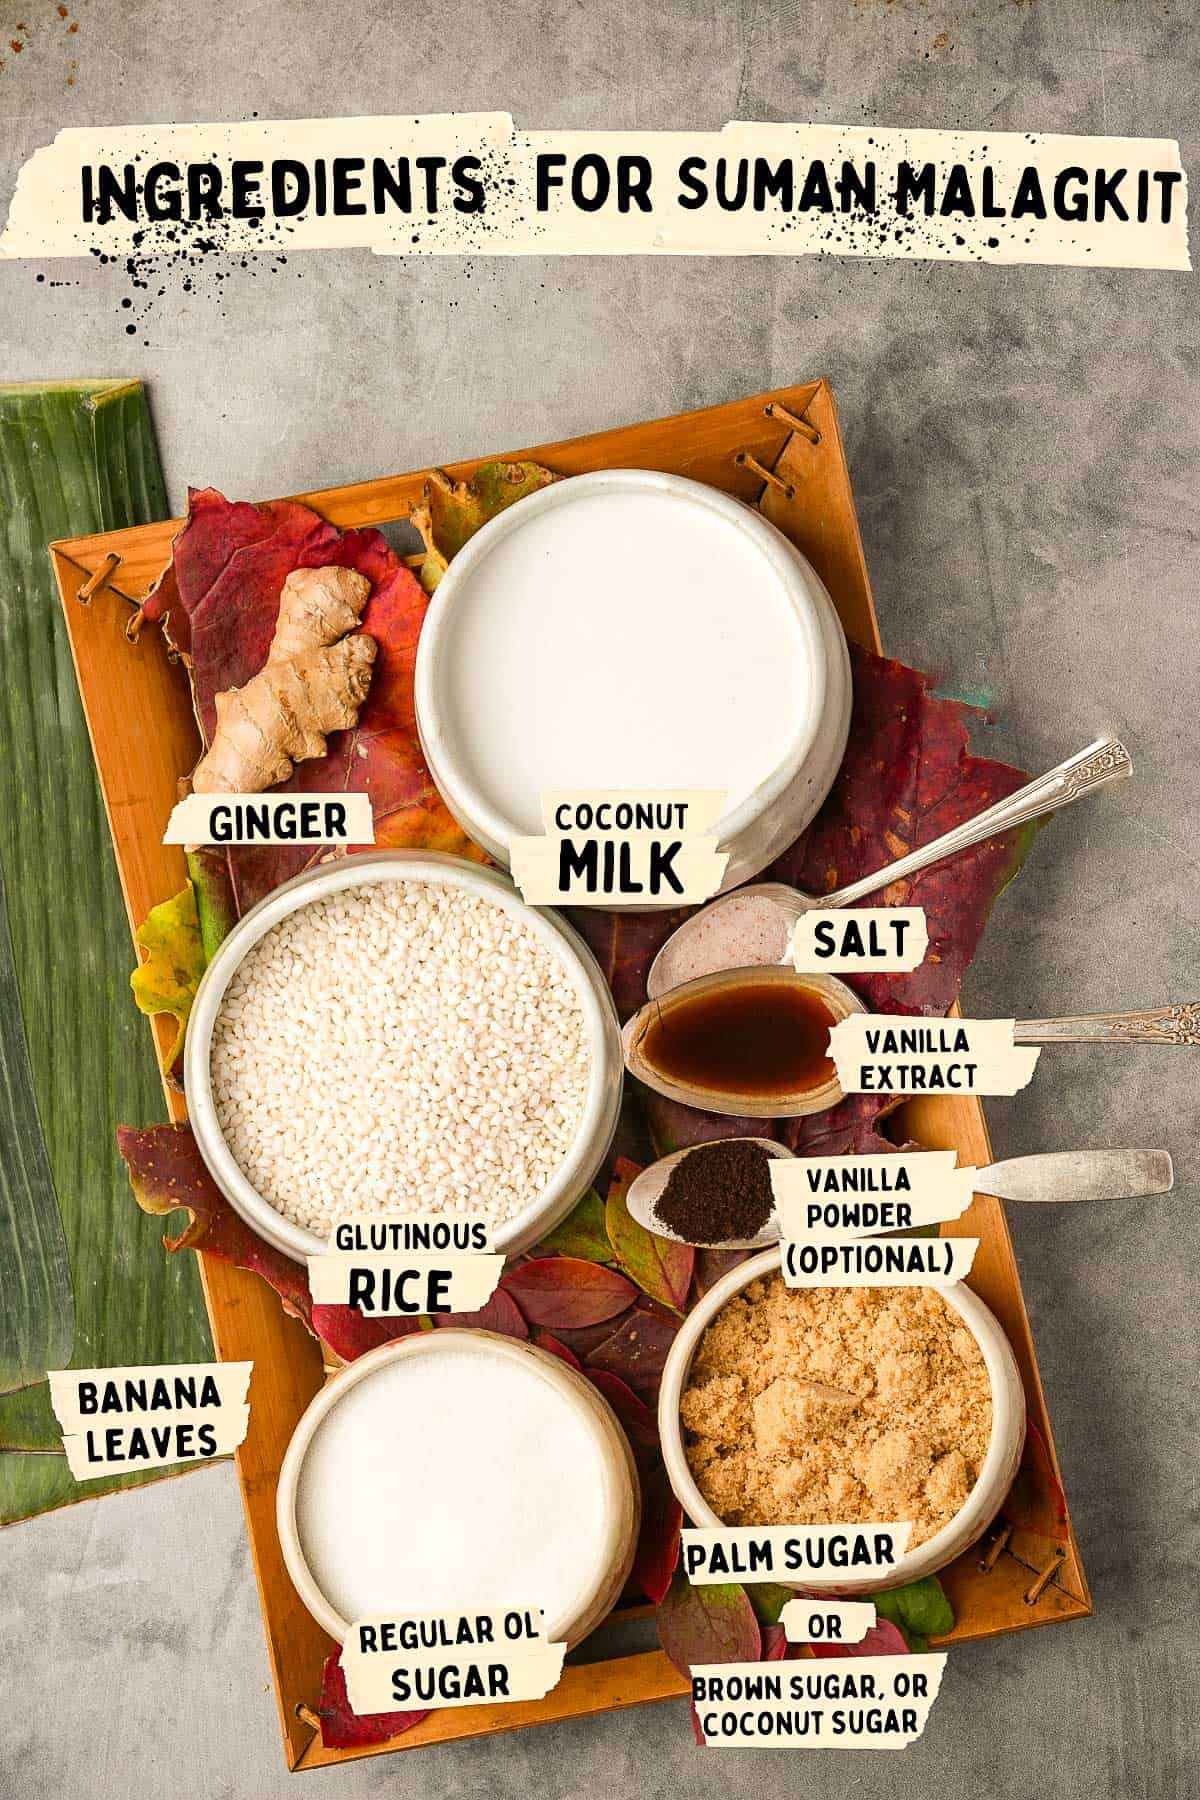 Ingredients for suman malagkit are laid out on a wooden tray.